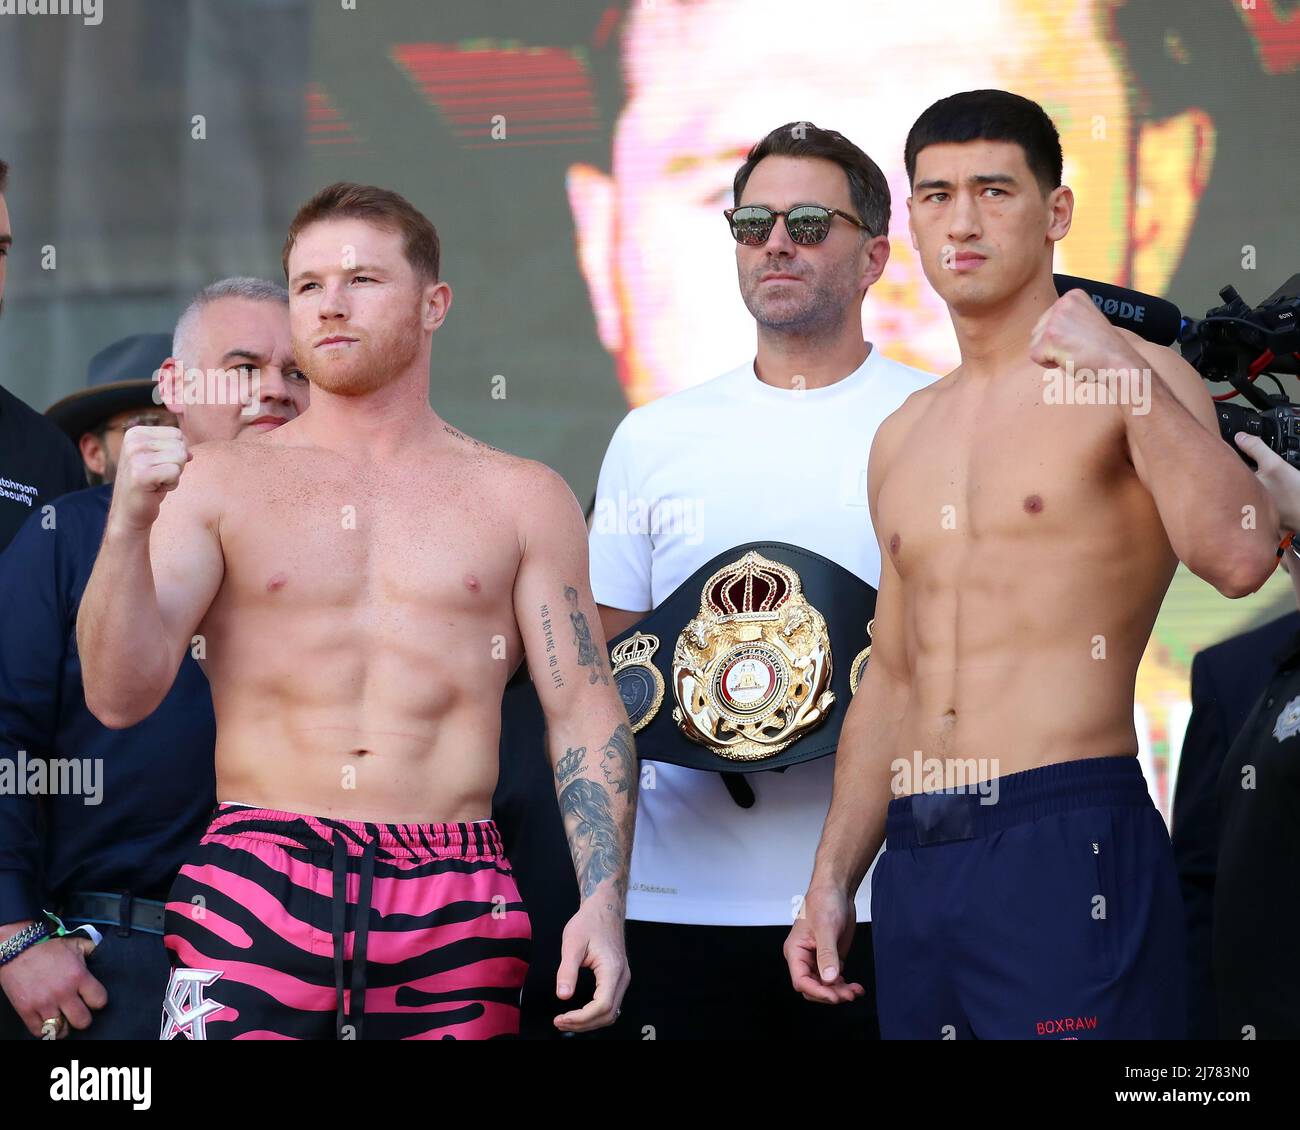 Las Vegas, United States. 06th May, 2022. LAS VEGAS, NV - MAY 6: (L-R)  Boxers Canelo Álvarez and Dmitry Bivol pose during the official weigh-in  for their bout at the T-Mobile Arena